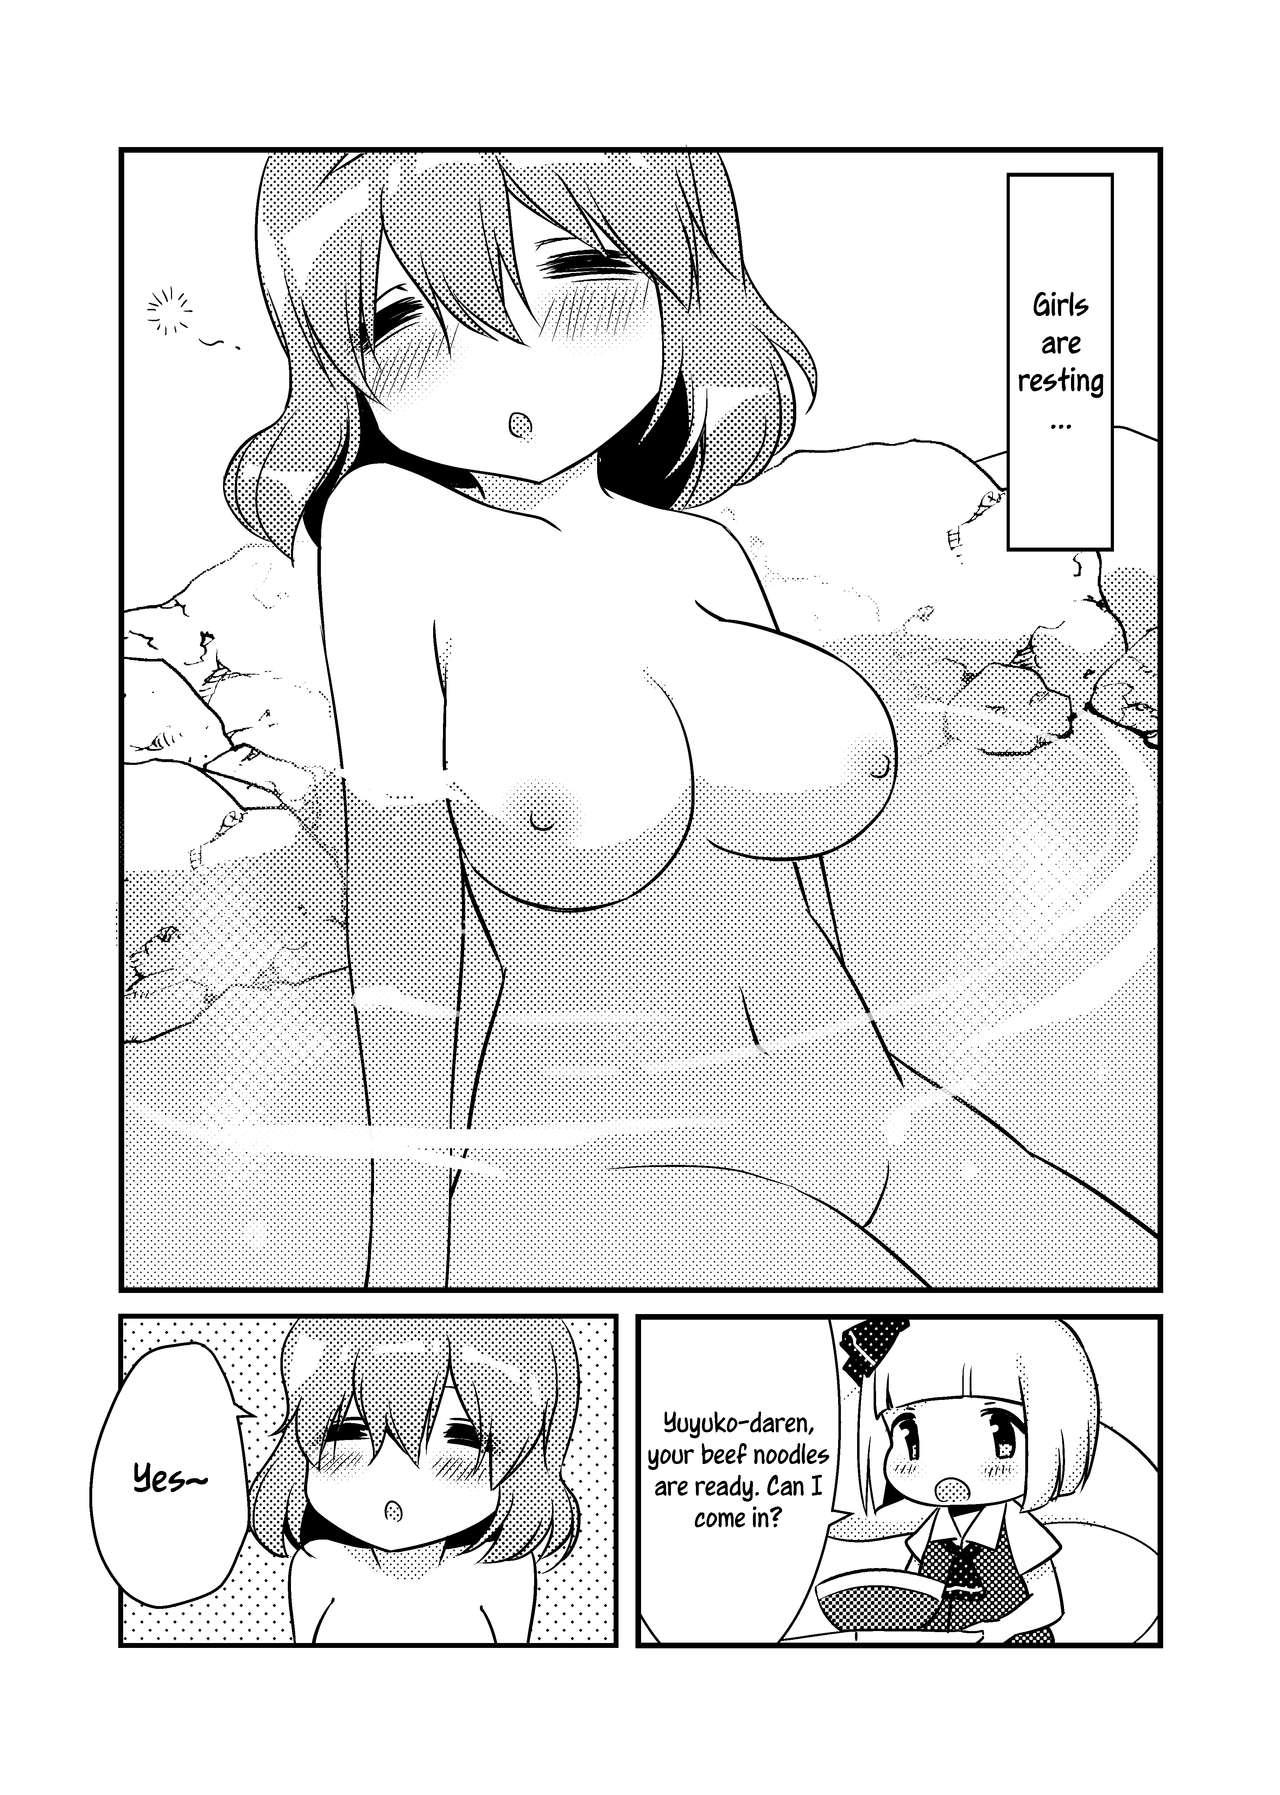 Sexcam ????一起泡温泉吧！ | ????Let's Soak in the Hot Spring! - Touhou project Stepdad - Page 3